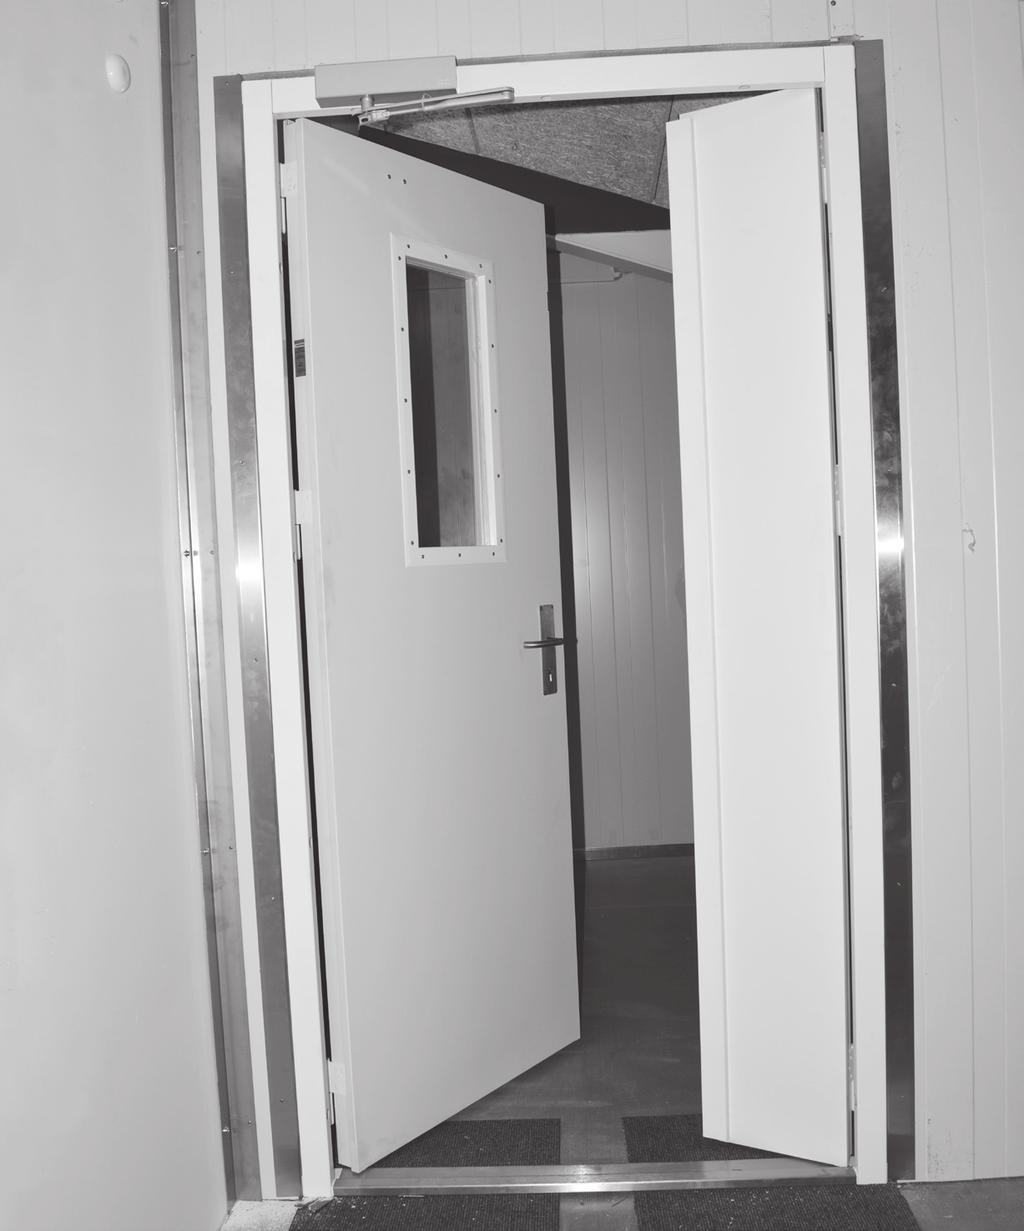 Hinged Doors - Industry, 62 mm TECHNICAL SPECIFICATIONS: MEASUREMENTS Max. W 1200 x H 2200 mm. INSULATION Inorganic material.